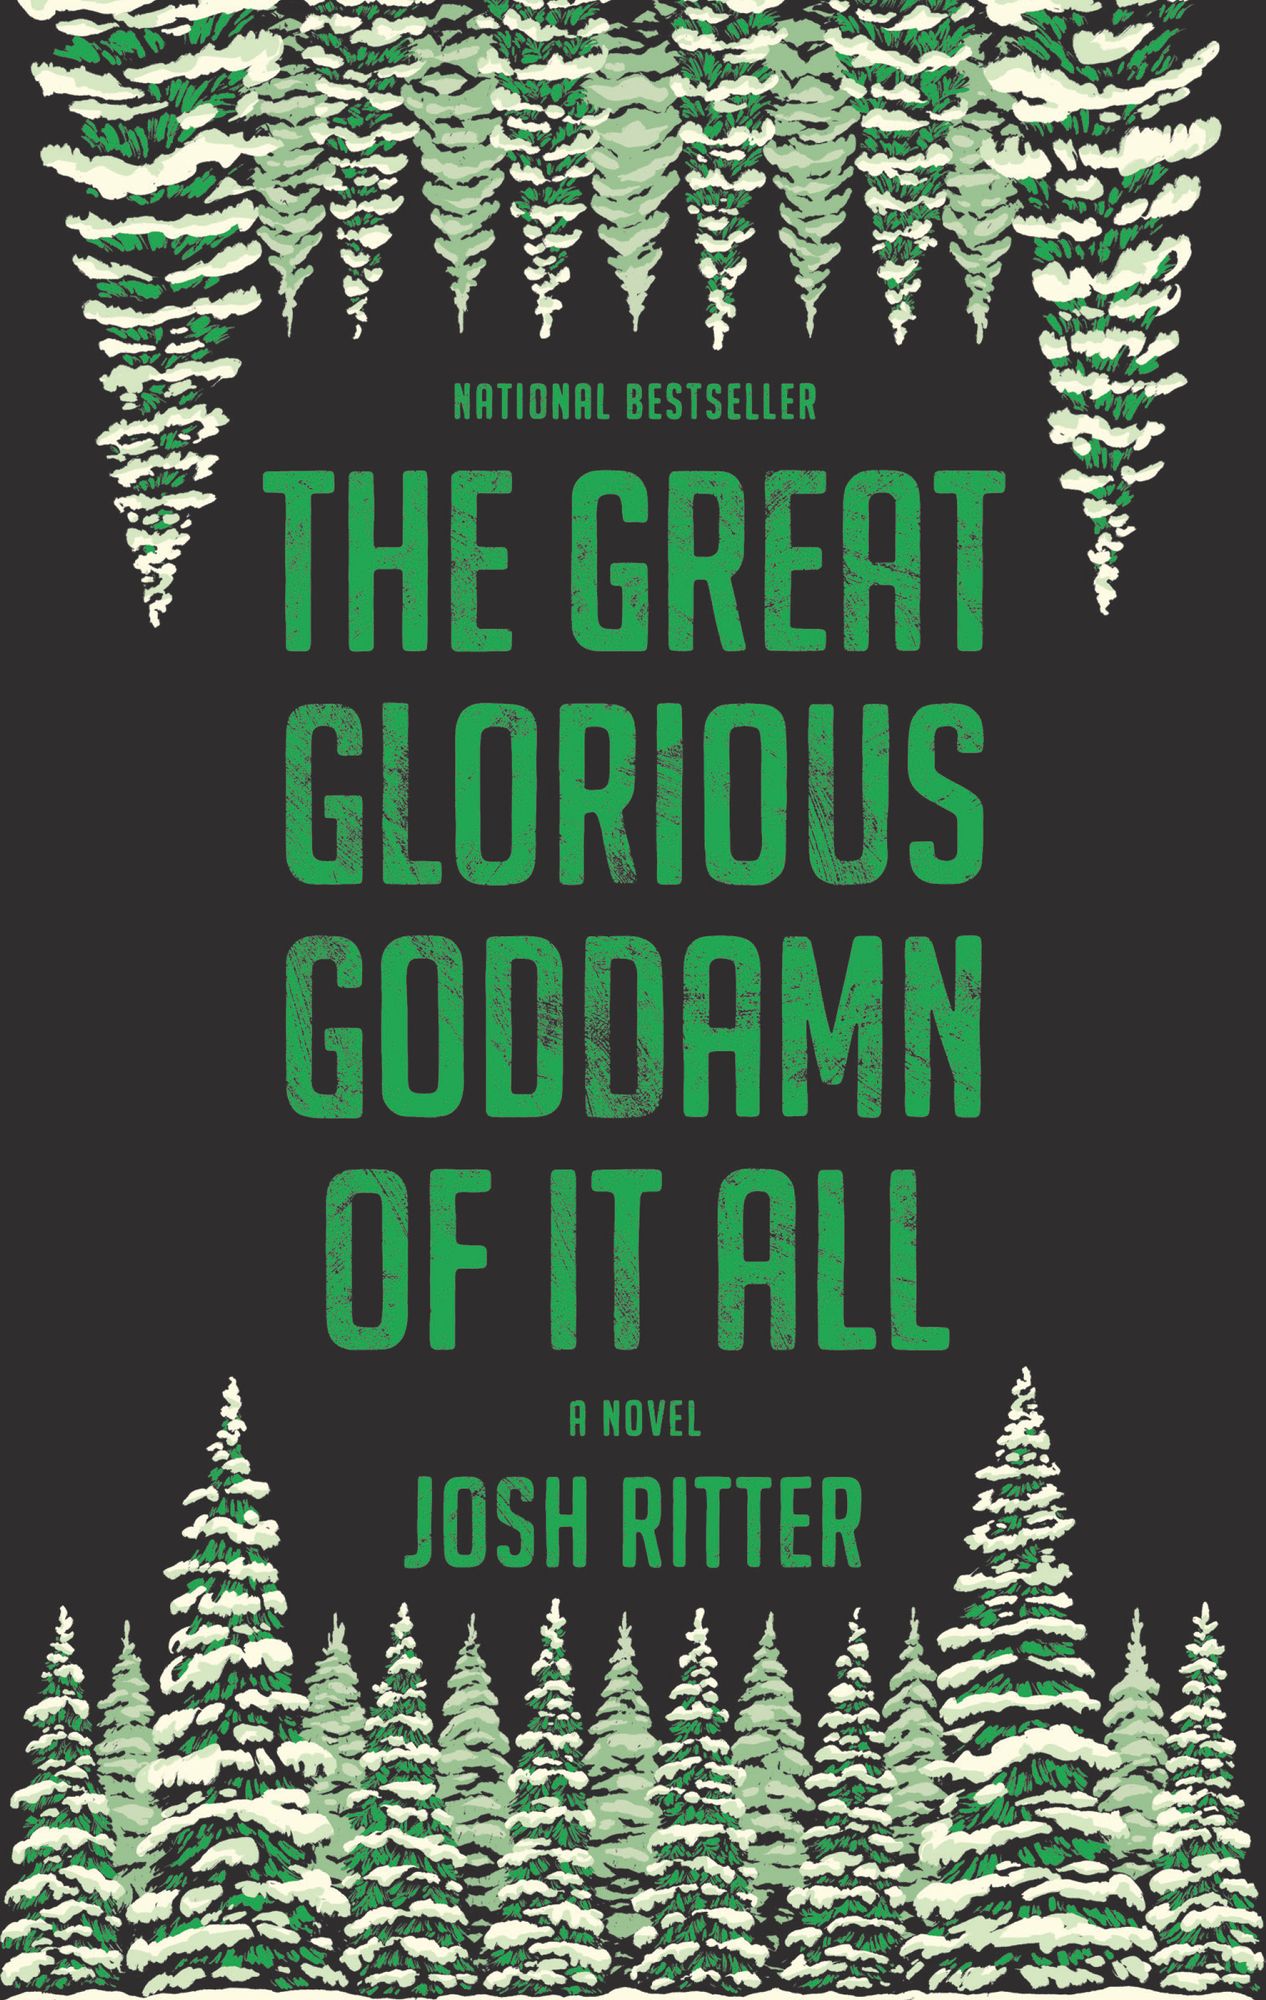 The Great Glorious Goddamn of It All by Josh Ritter